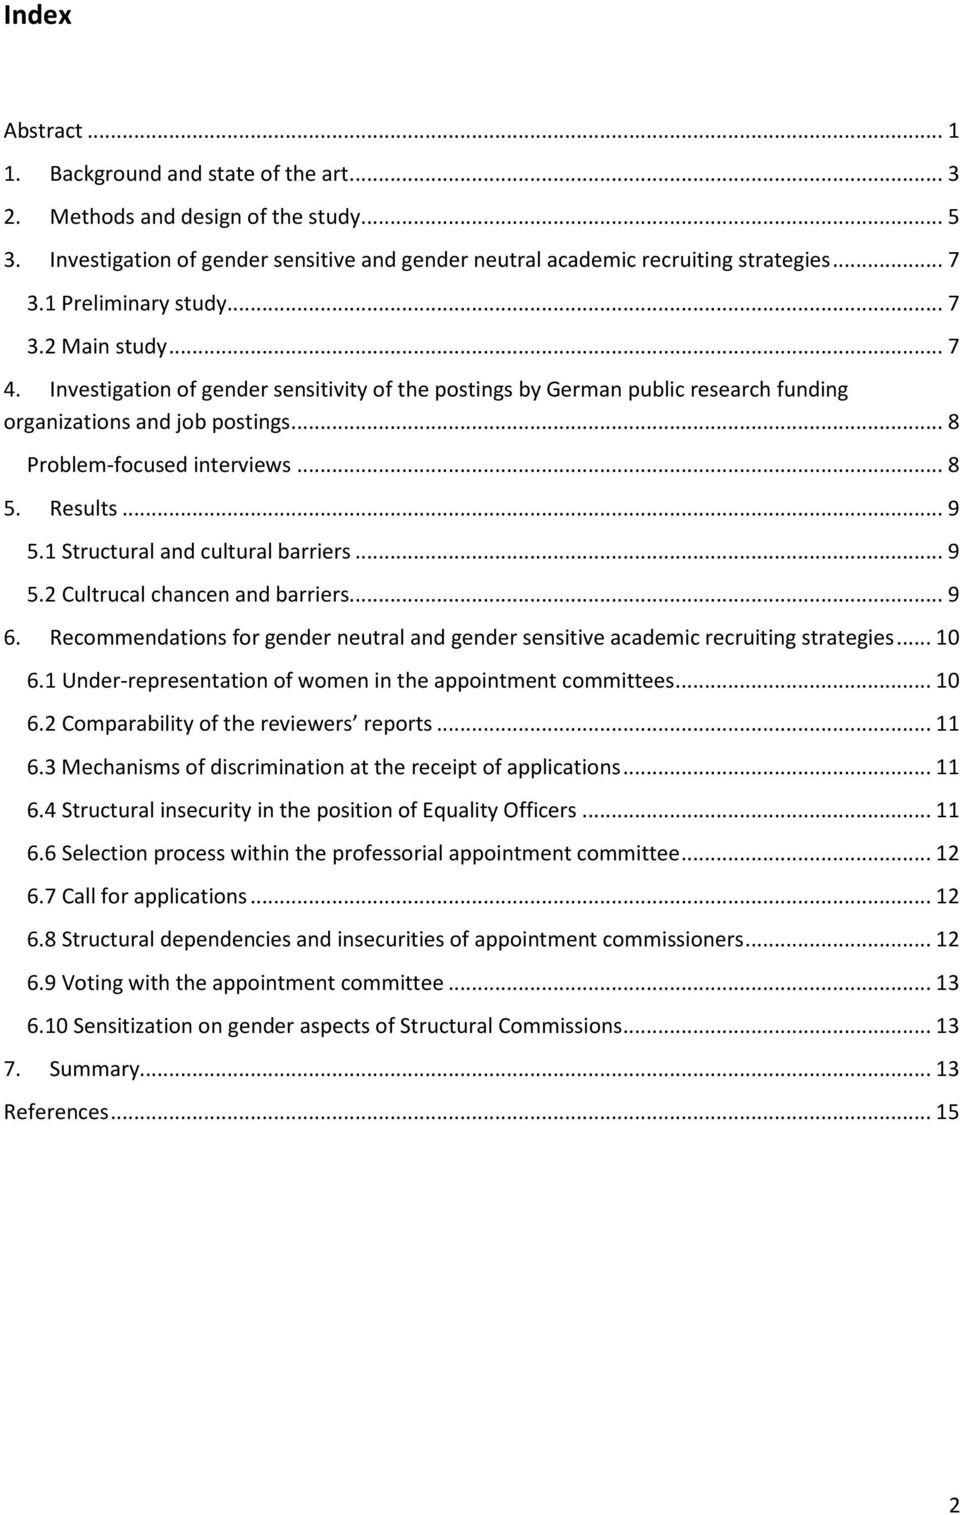 .. 8 5. Results... 9 5.1 Structural and cultural barriers... 9 5.2 Cultrucal chancen and barriers... 9 6. Recommendations for gender neutral and gender sensitive academic recruiting strategies... 10 6.